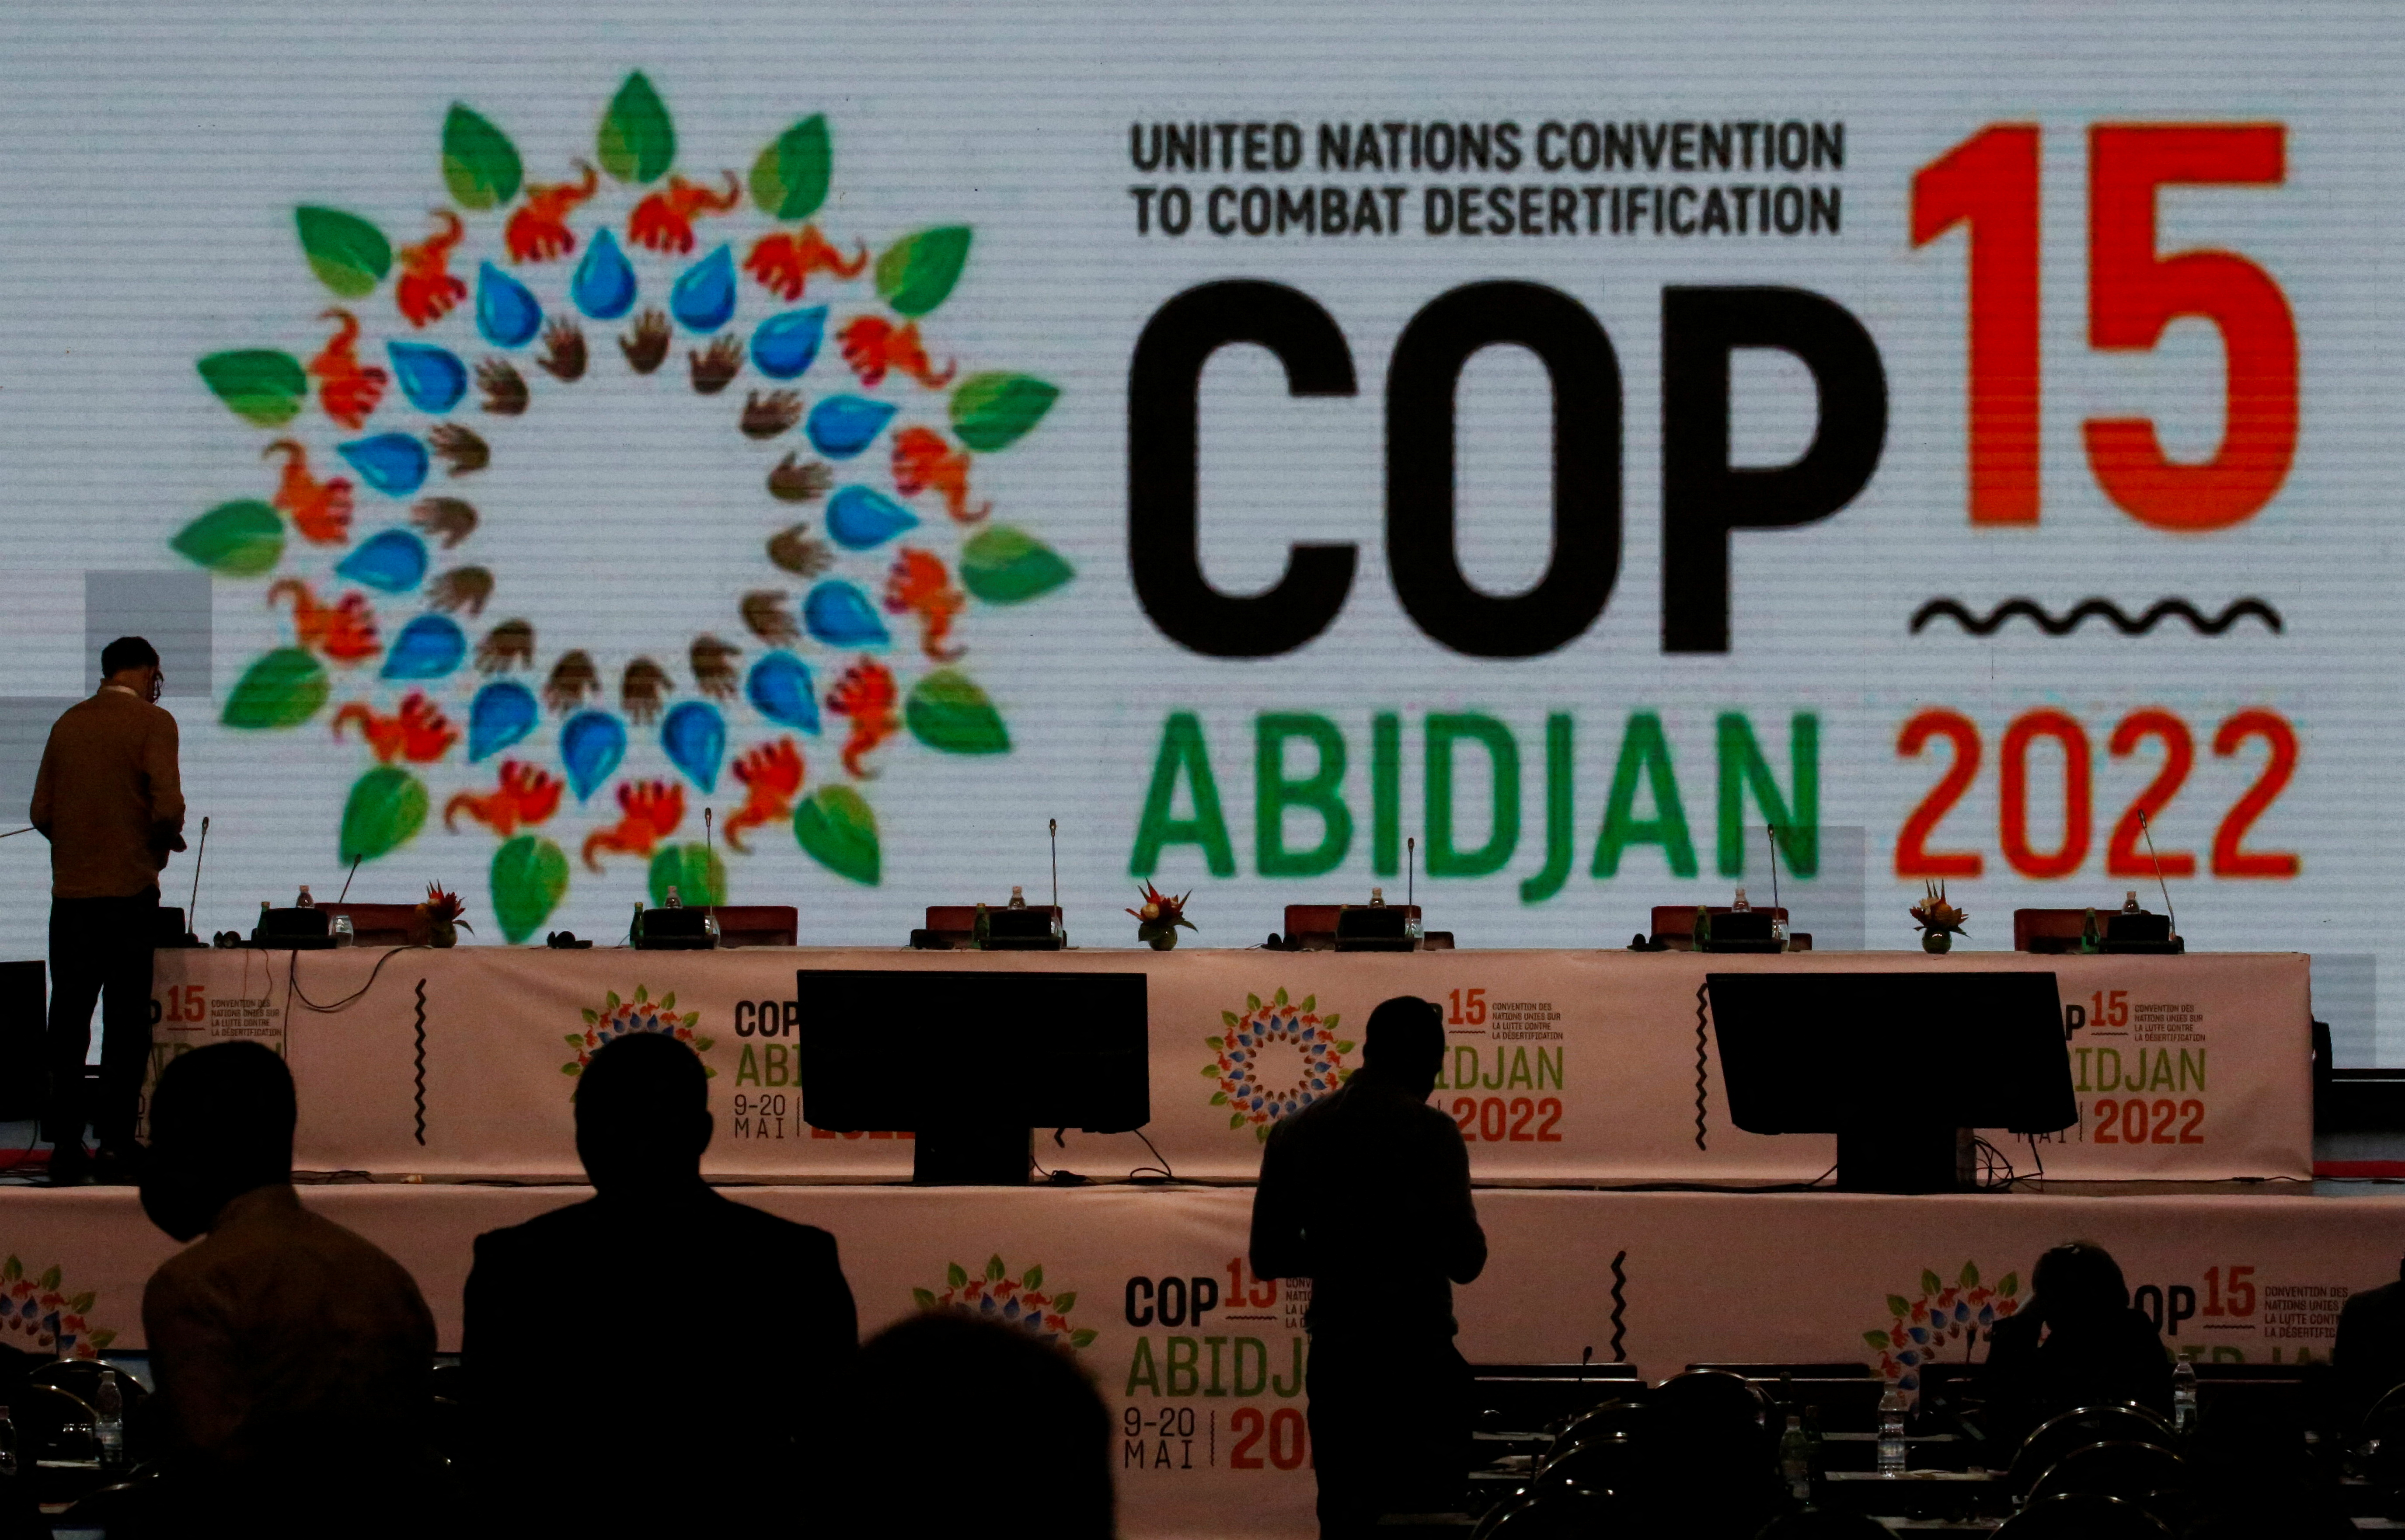 The opening of the 15th session of the United Nations Convention to Combat Desertification in Abidjan